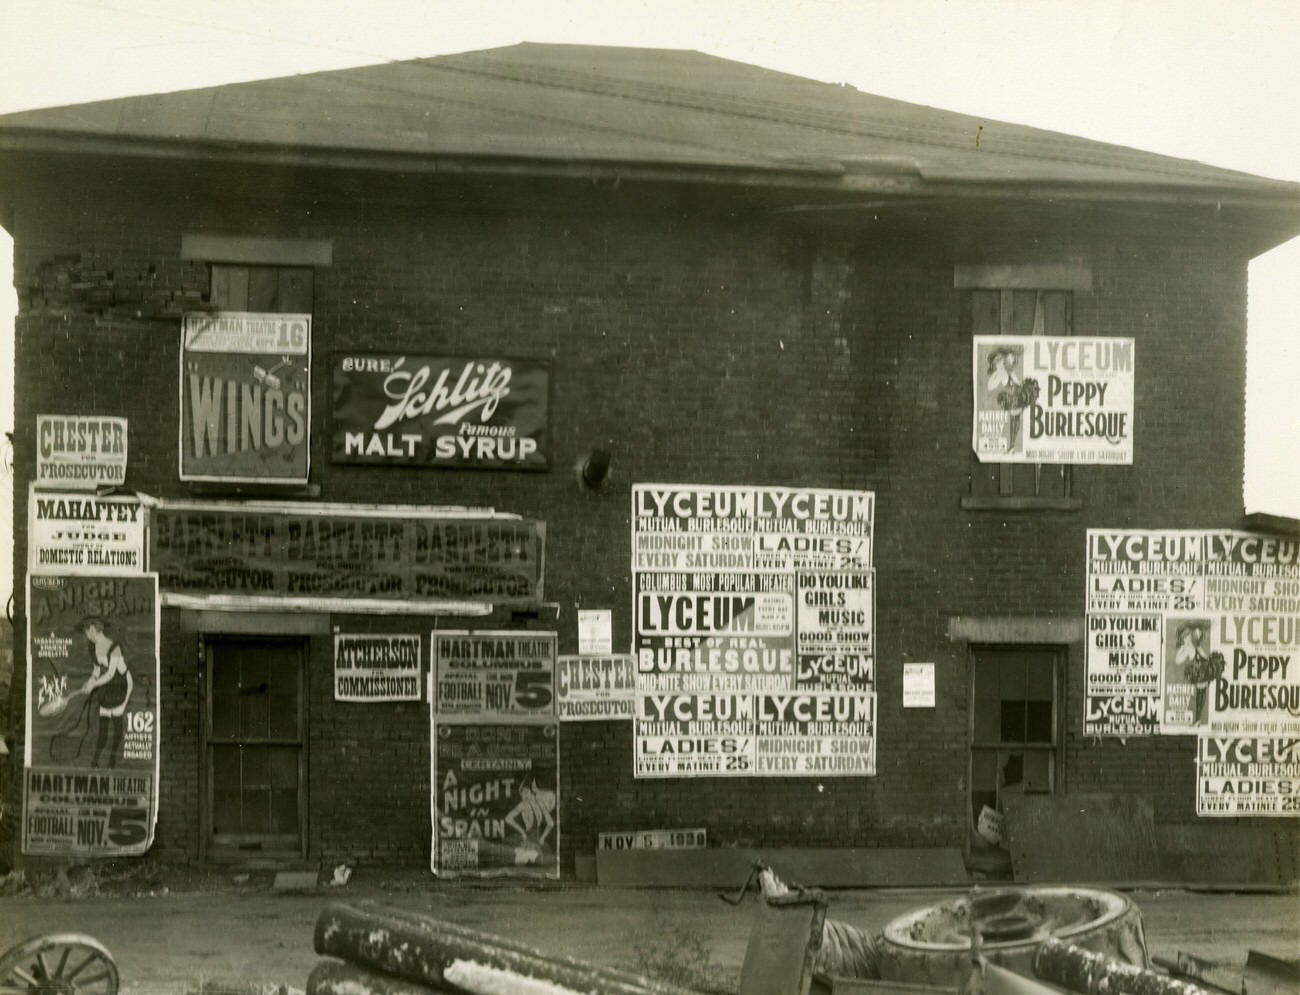 Derelict building covered with burlesque theater ads, part of Olentagy-Scioto sewer project, November 5, 1939.